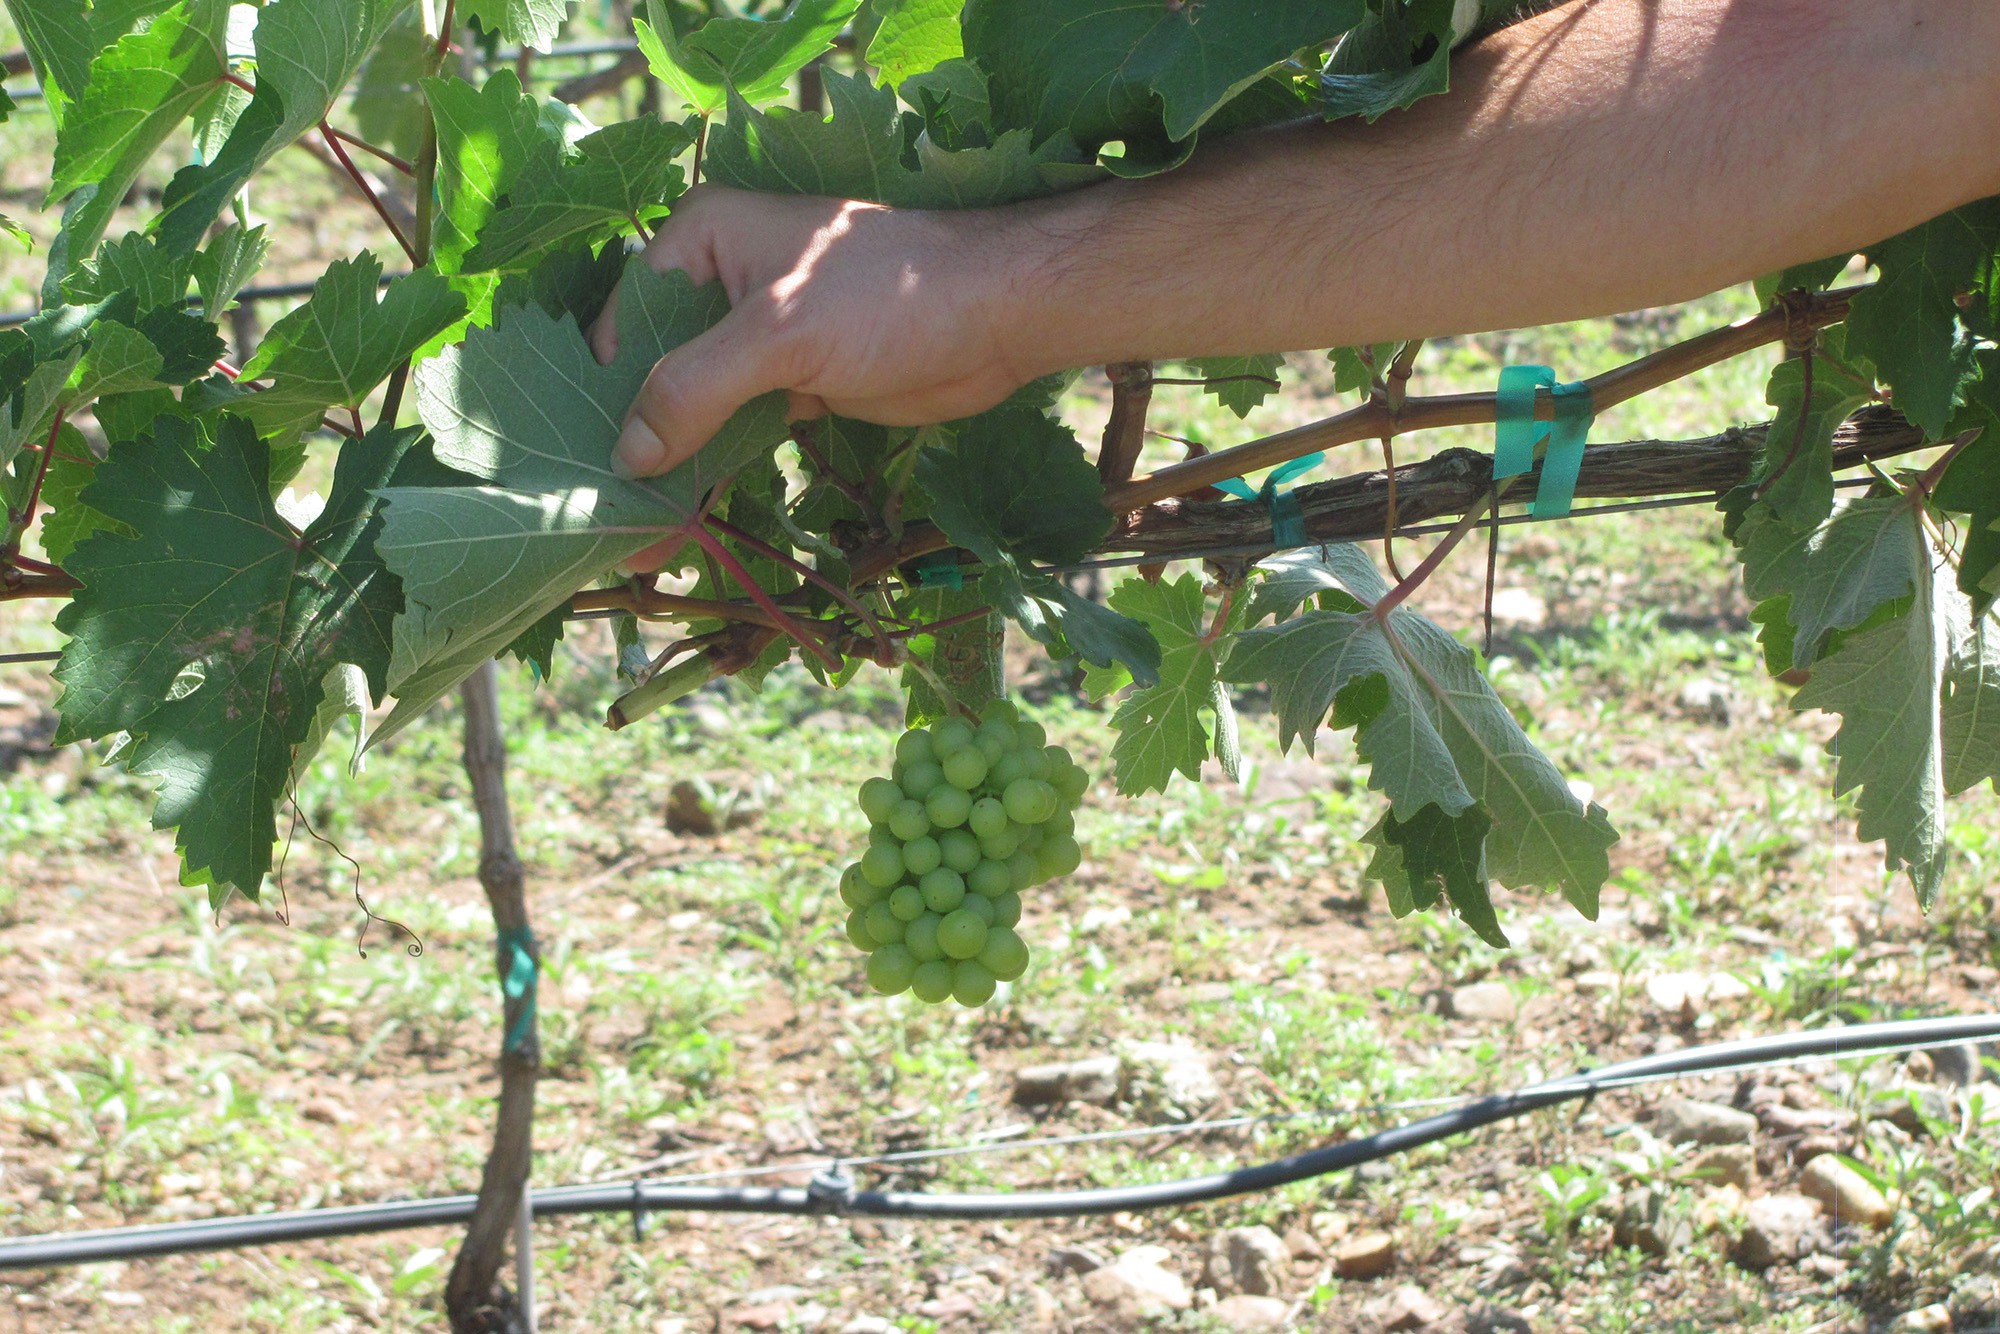 Students spend at least 60 hours per semester applying classroom lessons in growing grapes and making wine.